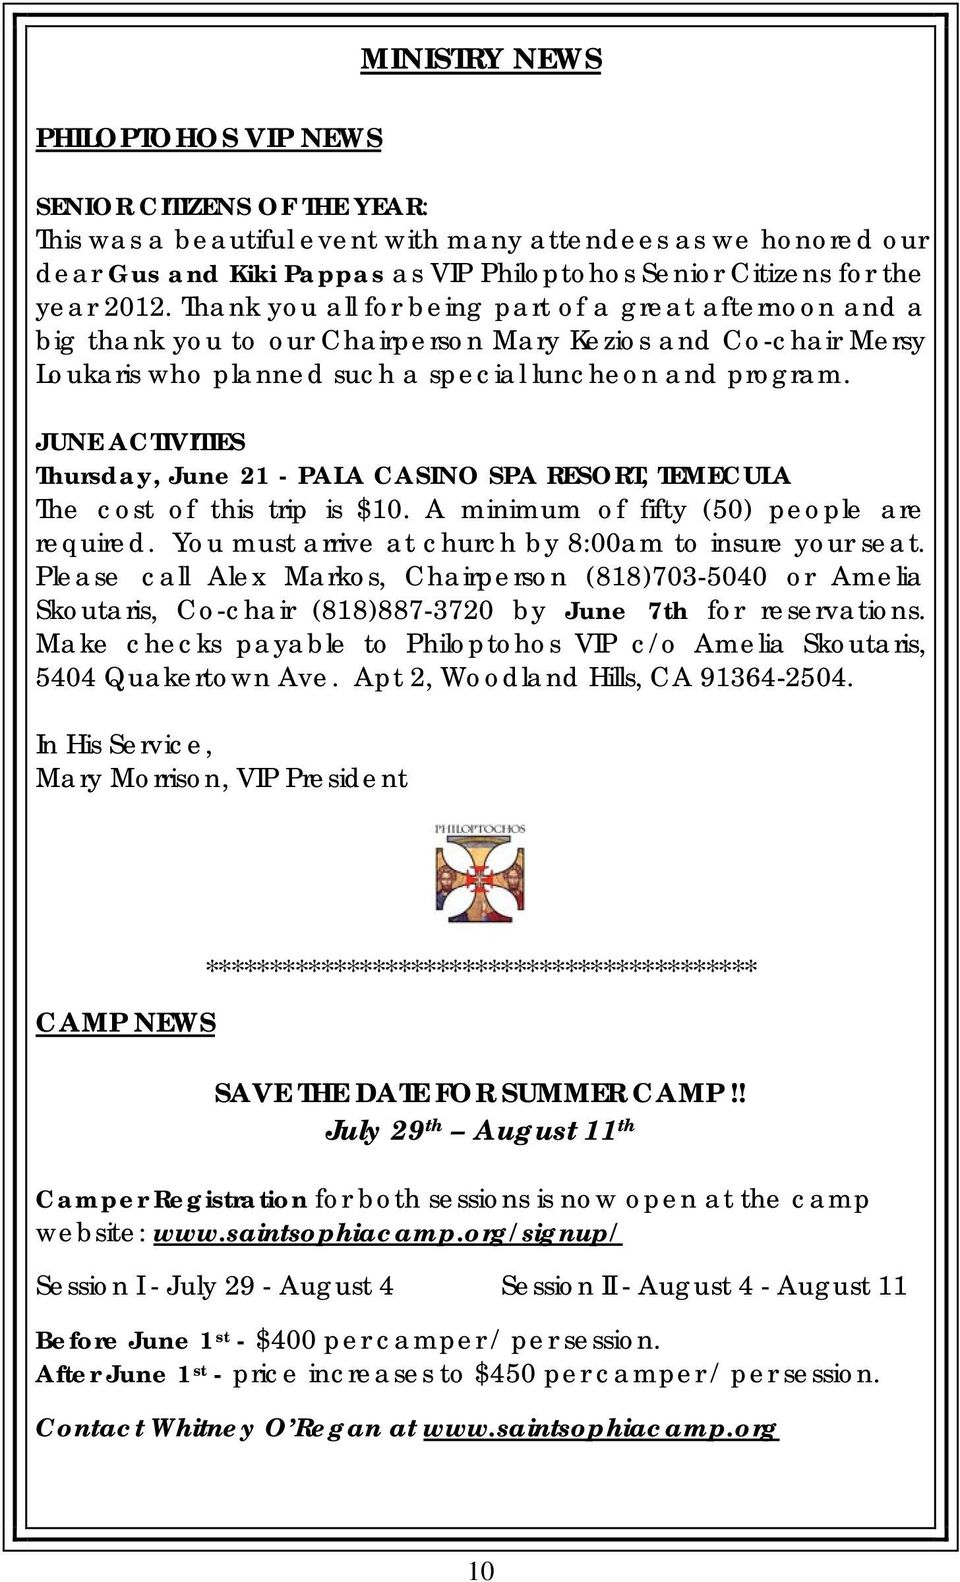 JUNE ACTIVITIES Thursday, June 21 - PALA CASINO SPA RESORT, TEMECULA The cost of this trip is $10. A minimum of fifty (50) people are required. You must arrive at church by 8:00am to insure your seat.